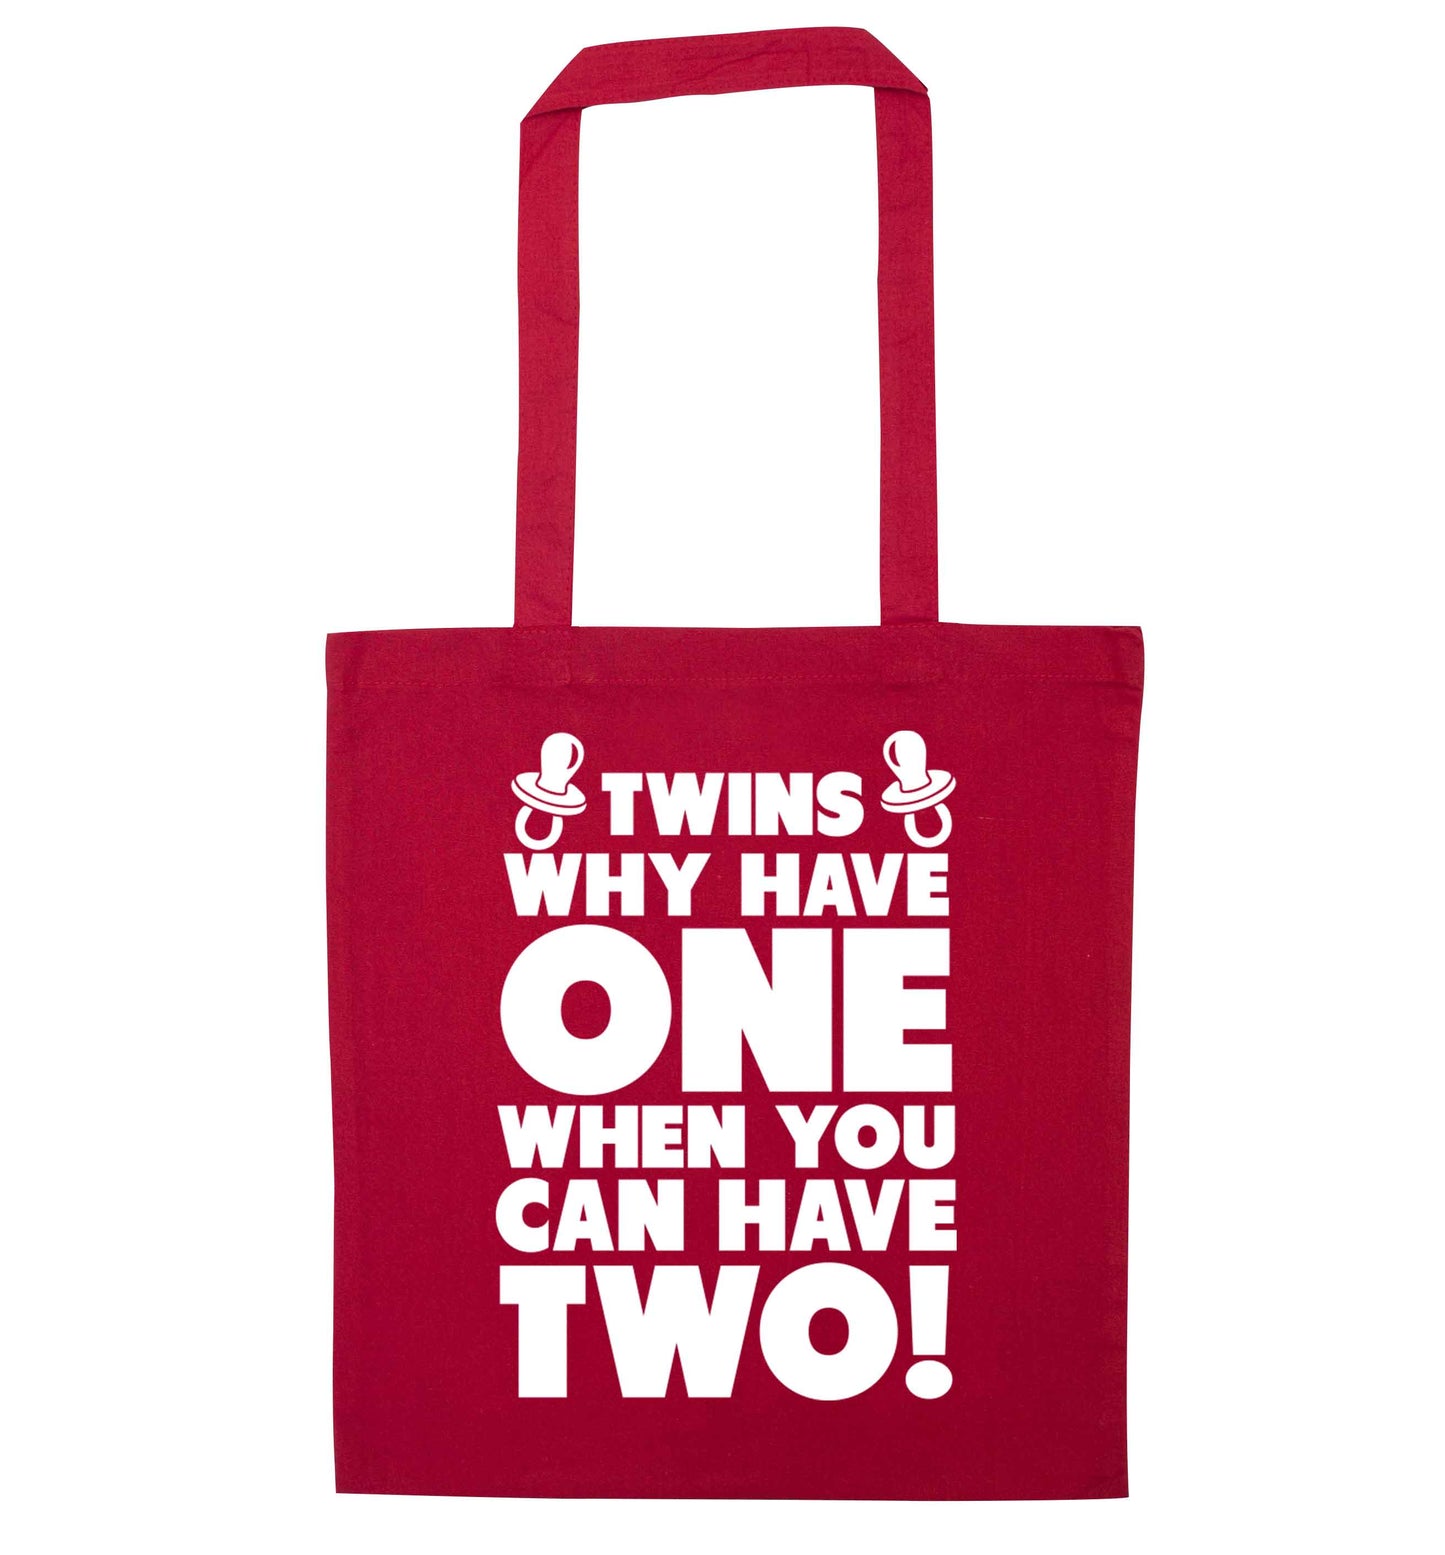 Twins why have one when you can have two red tote bag